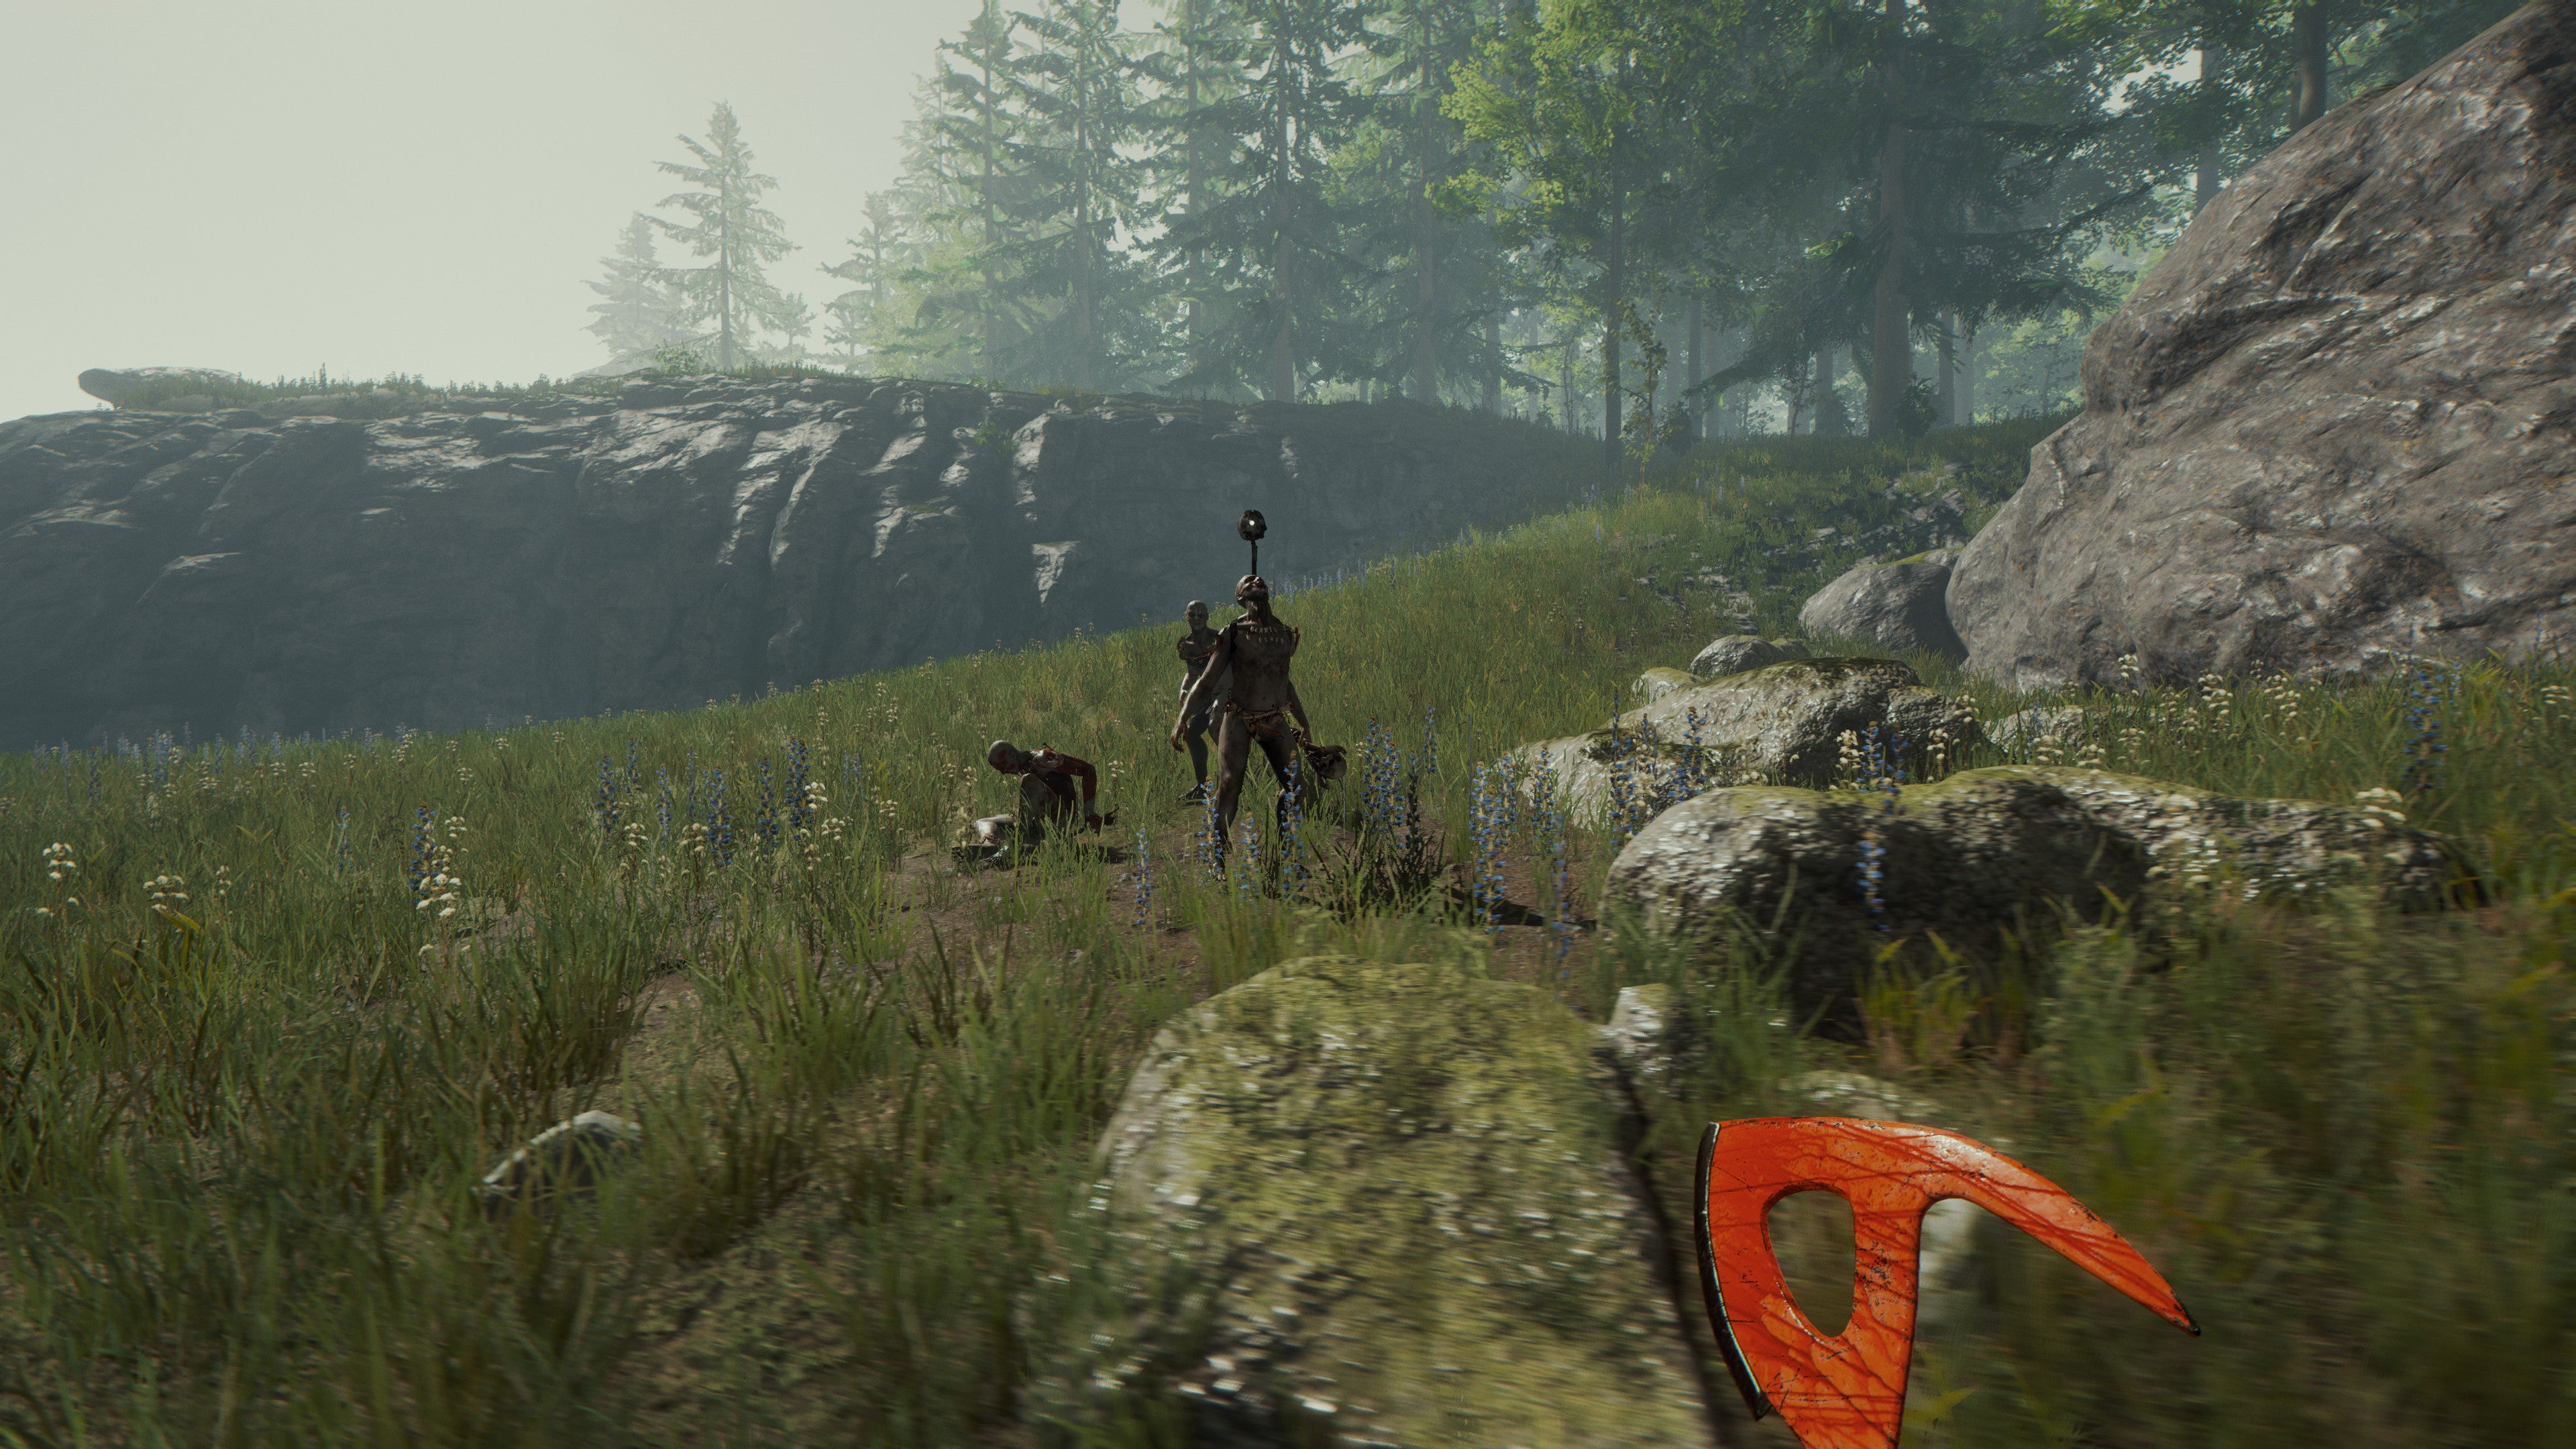 The player spots three mutants in a grassy plain in The Forest